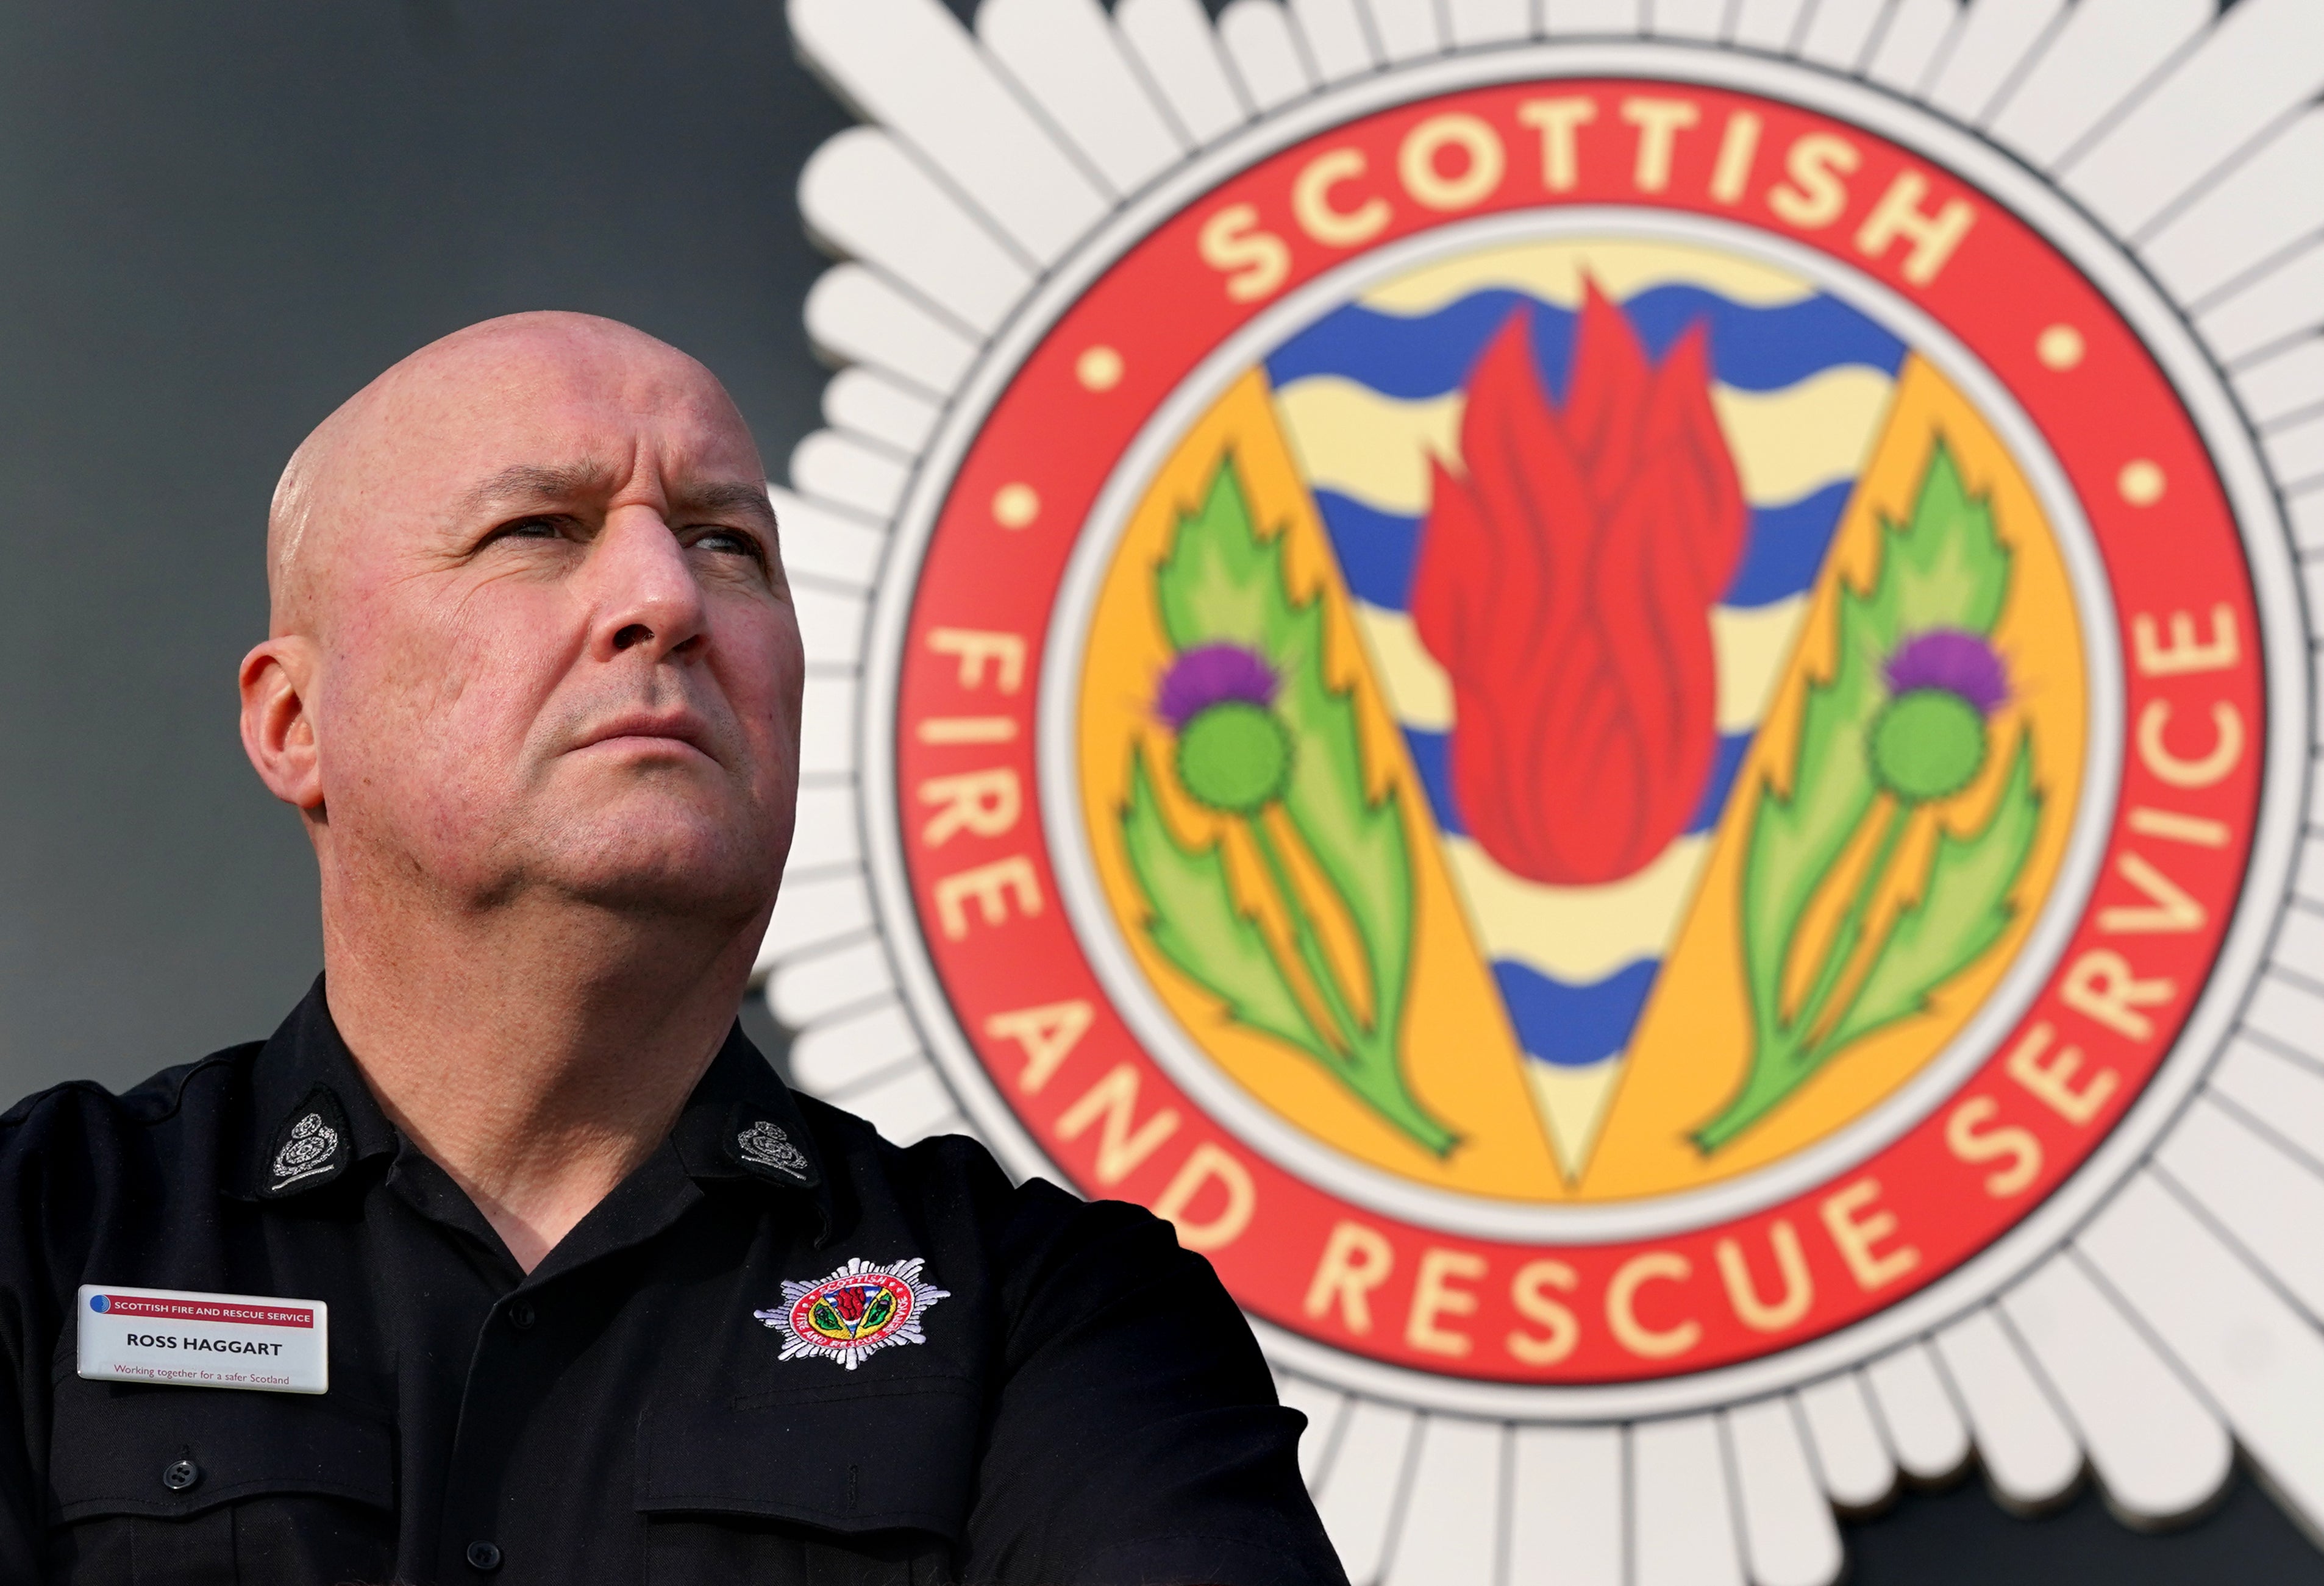 SFRS interim Chief Officer Ross Haggart said the seven men had made the ‘ultimate sacrifice’. (Andrew Milligan/PA)